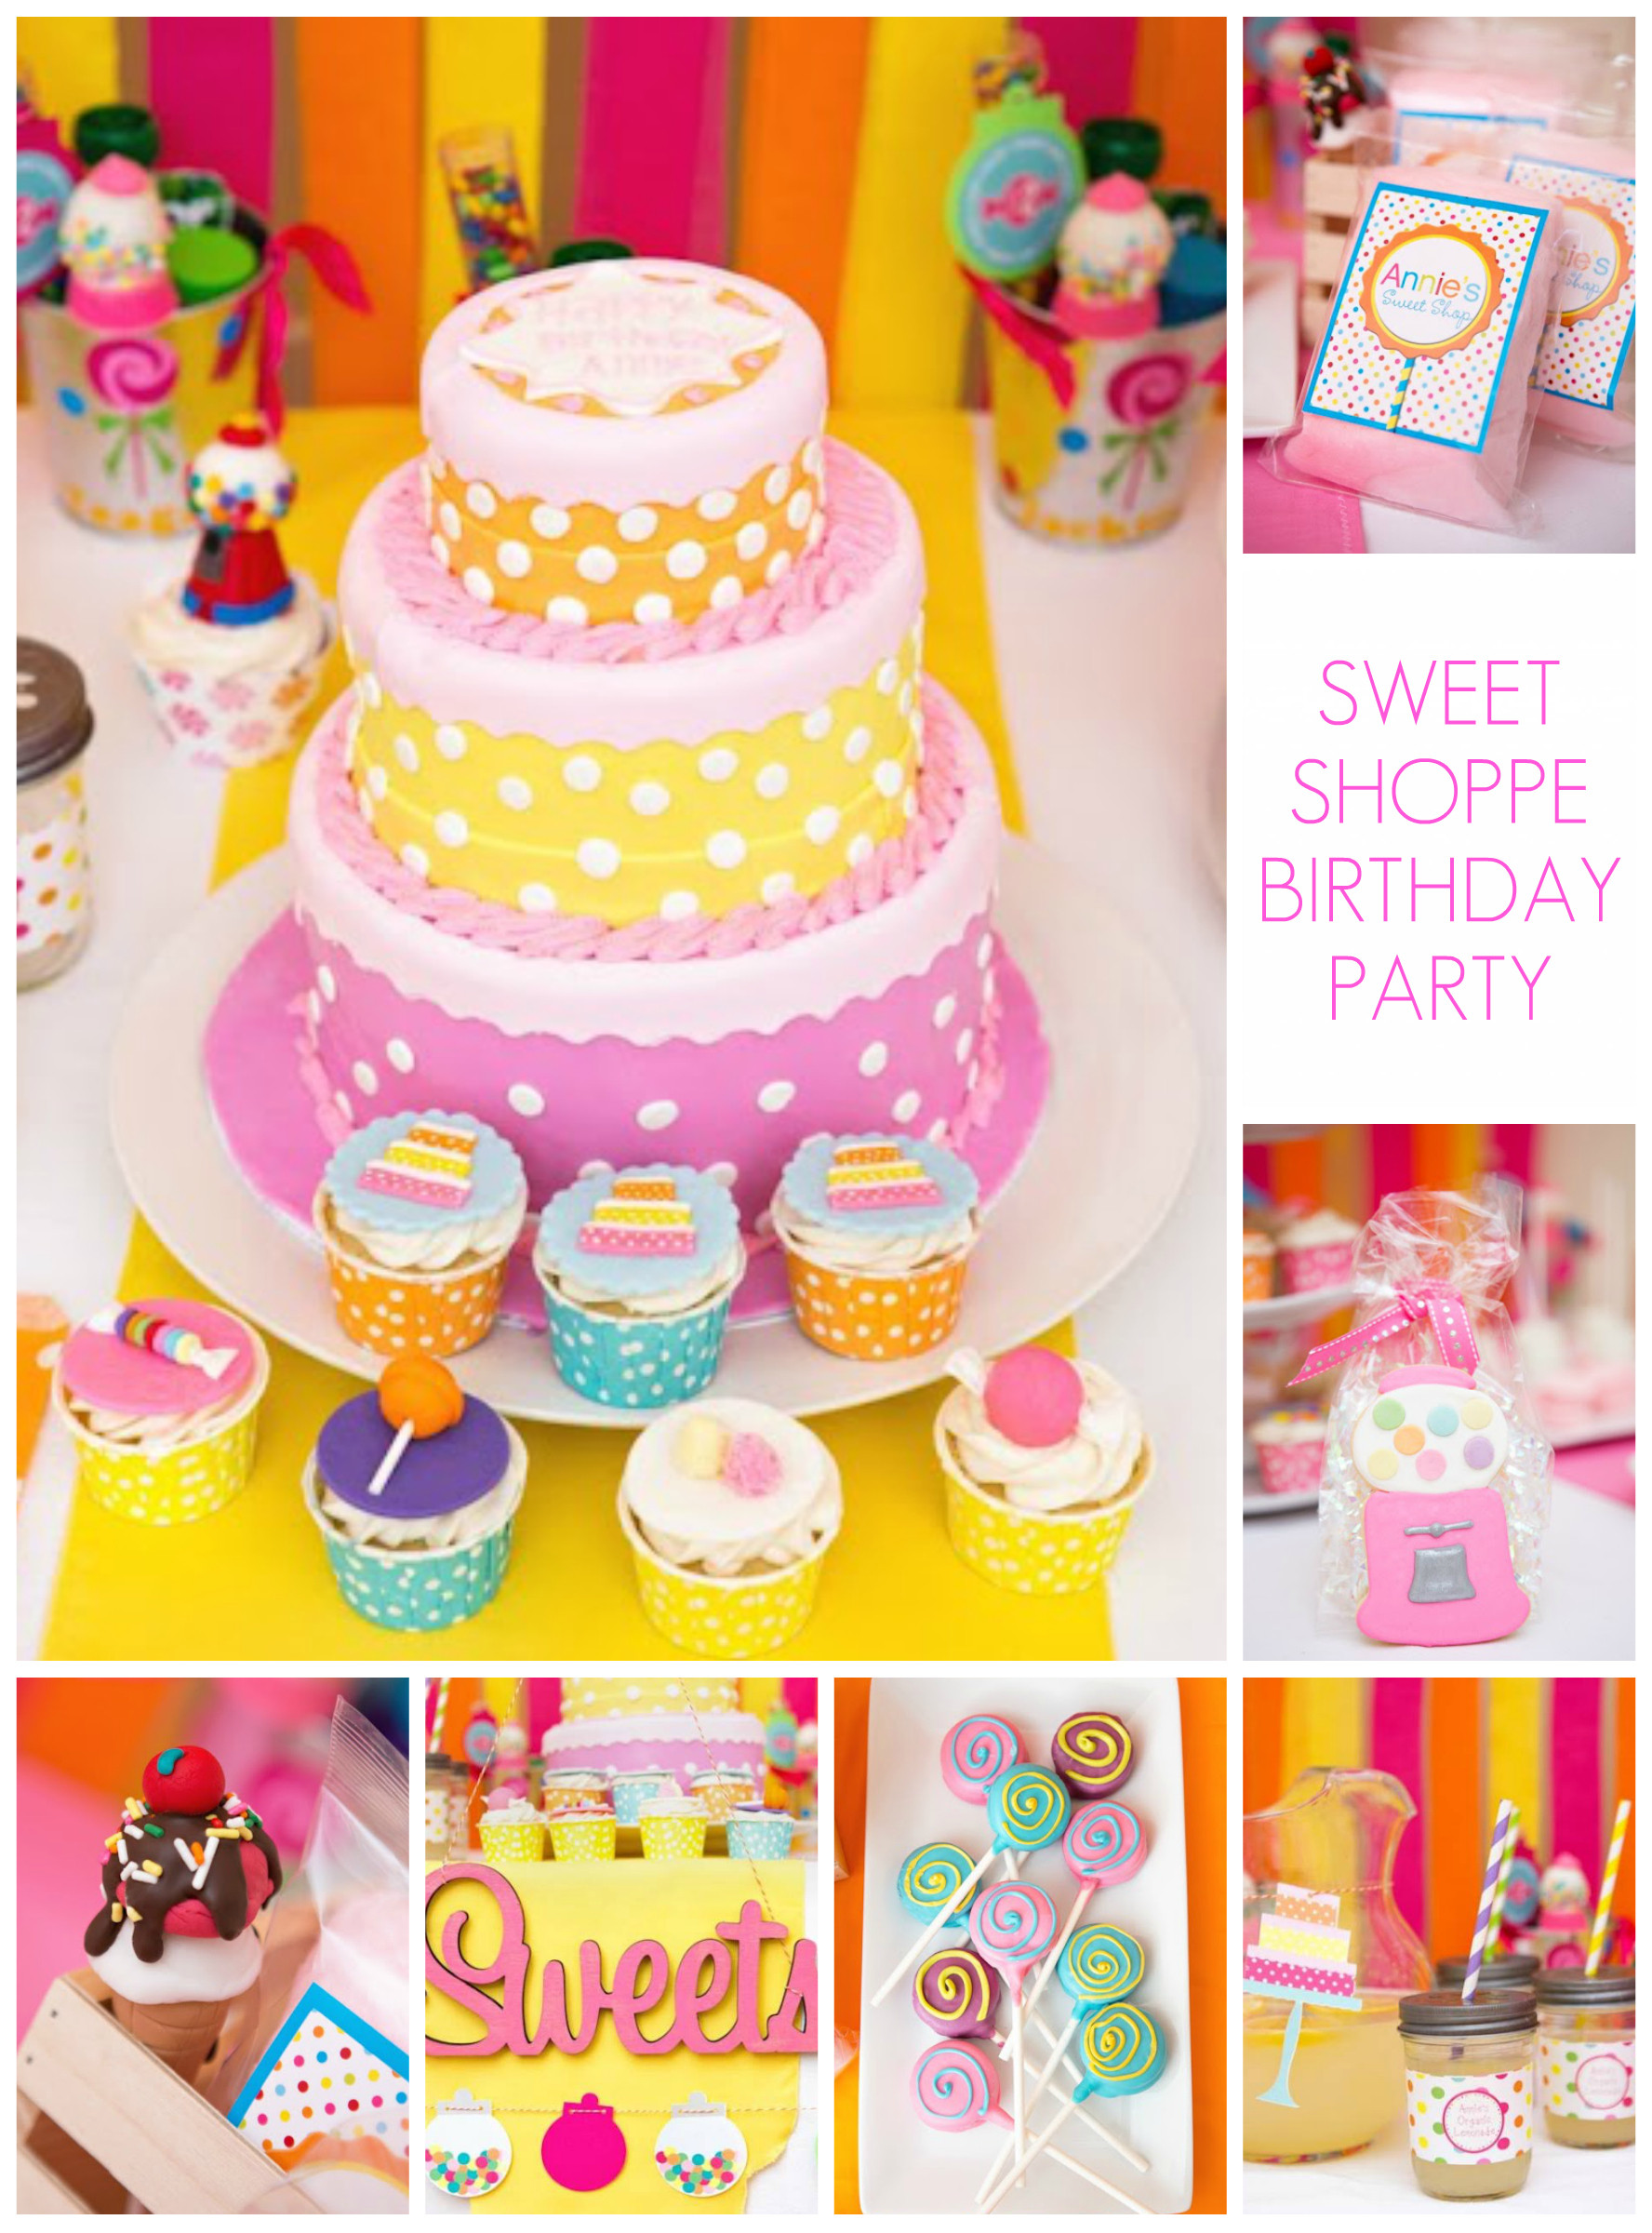 Candy Shoppe Birthday Party Ideas
 party Sweet Shoppe Party Birthday Creative Juice